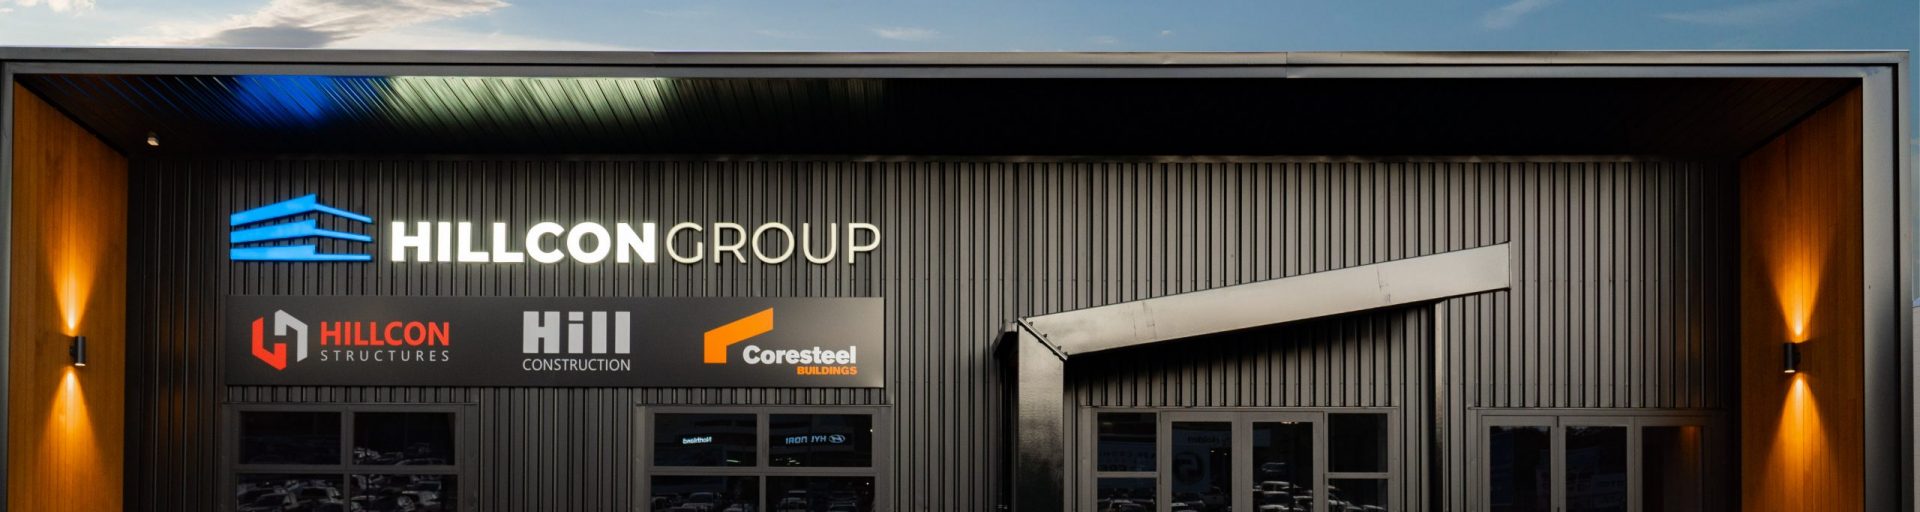 Hillcon Group building in Whangarei built by Coresteel